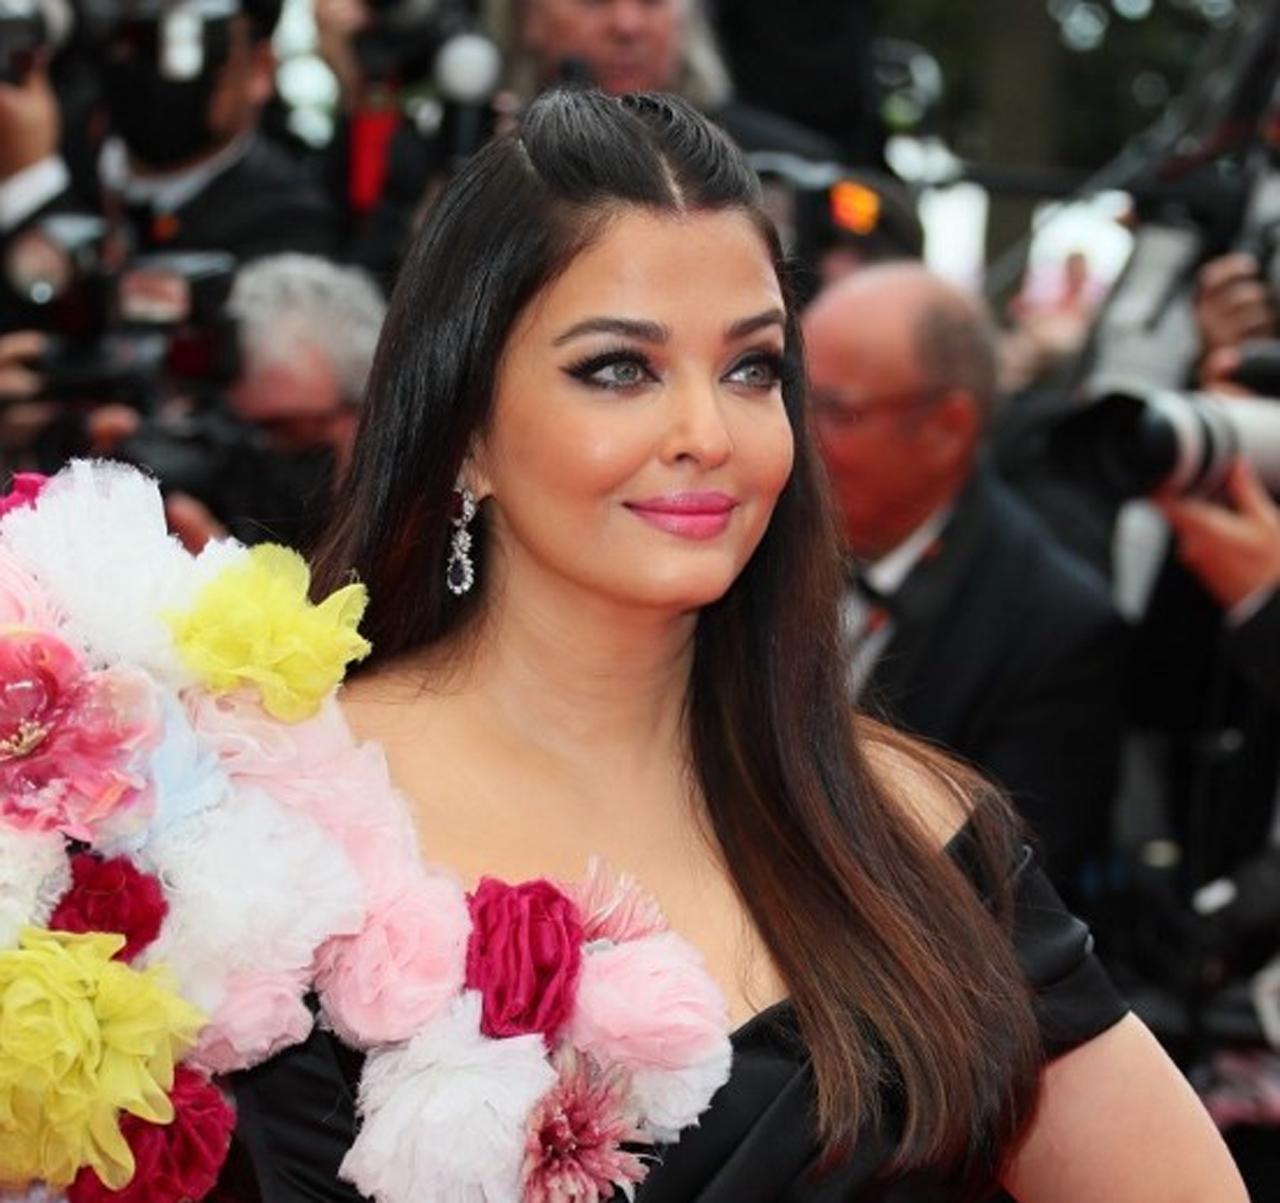 The 48-year-old star opted for defined brows, smokey eyes and pink lipstick. Her look had minimal accessories including cascading earrings and statement rings. Earlier on Wednesday, Aishwarya's first look at the festival had been unveiled and it was a head-to-toe pink attire. Aishwarya has been a regular attendee at the Cannes Film Festival for years now. Her husband Abhishek Bachchan and daughter Aaradhya are also currently at the French Riviera.